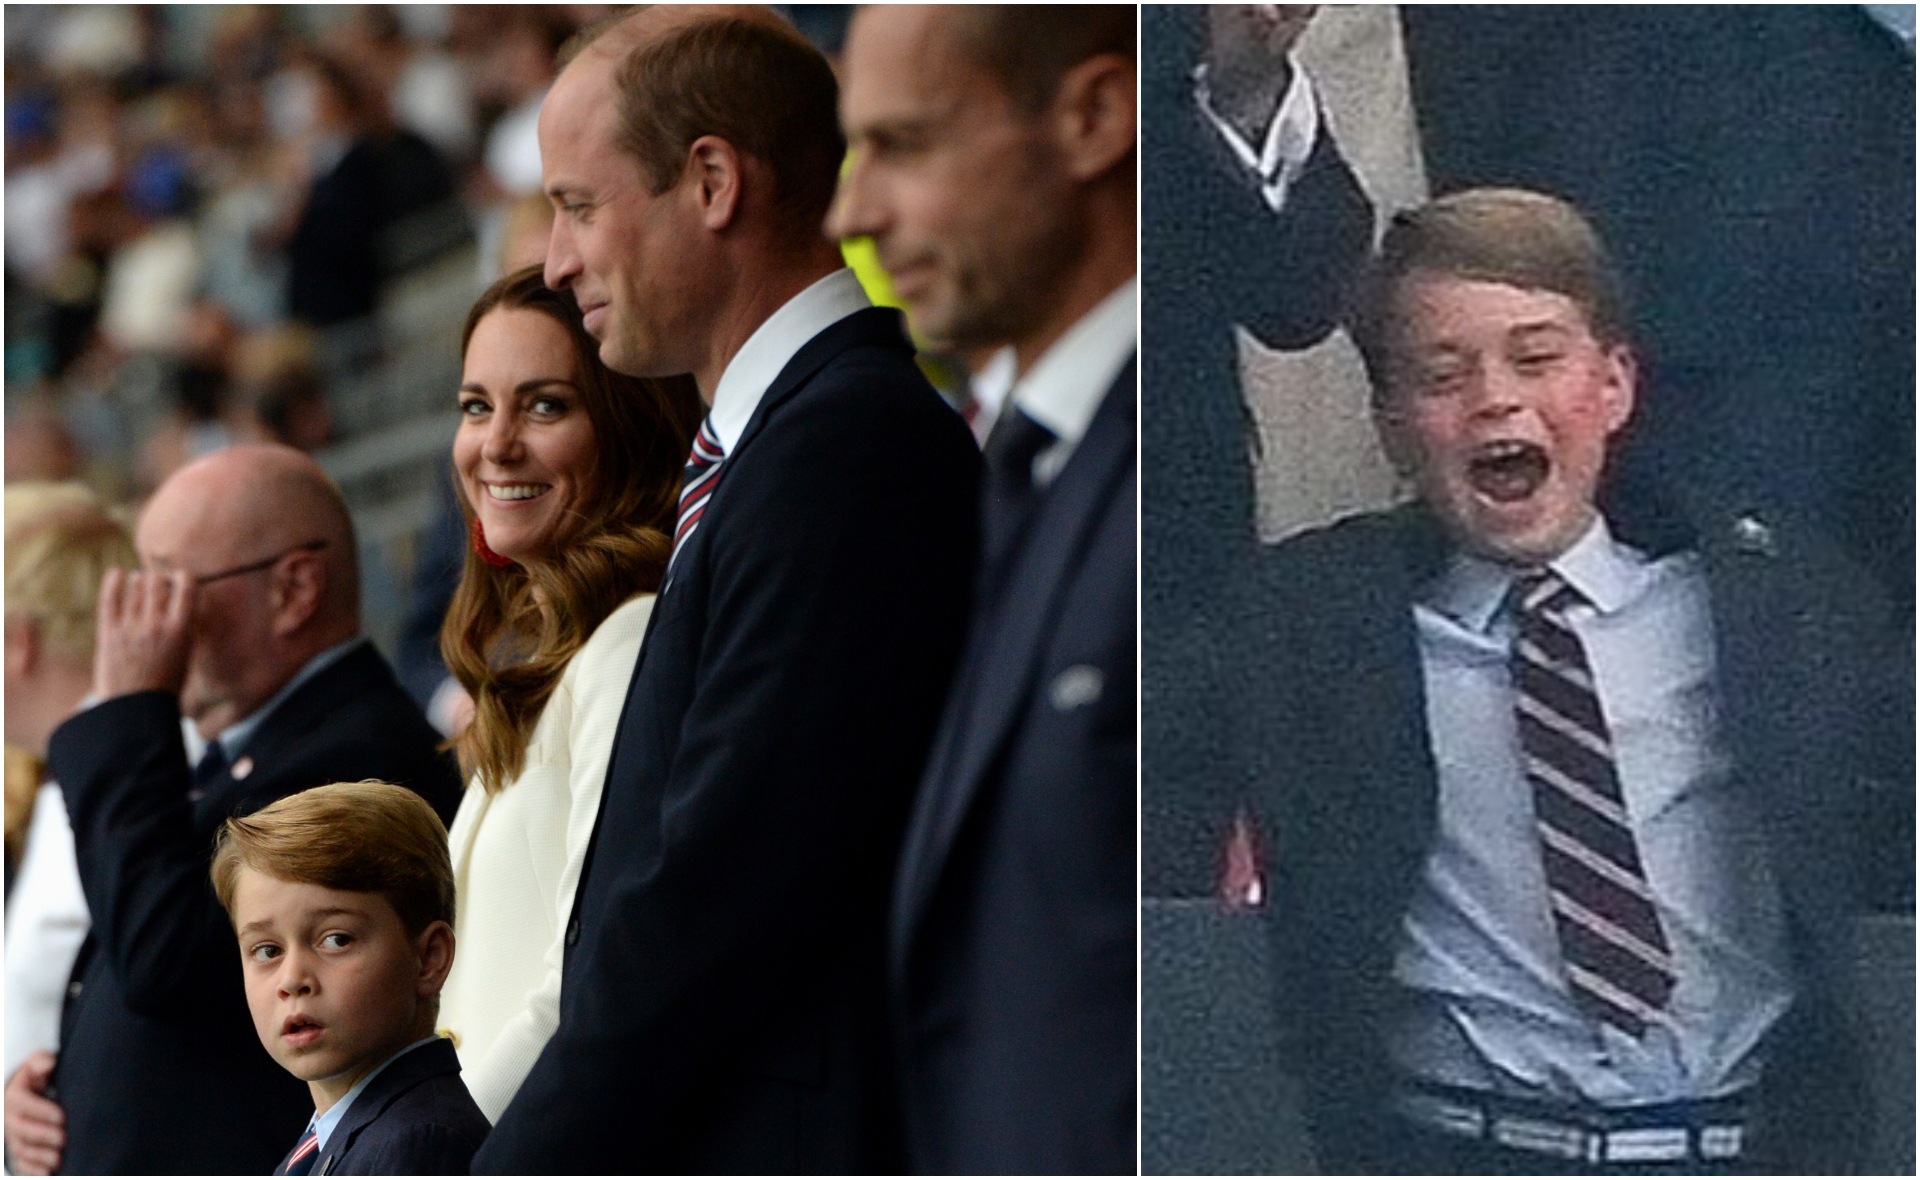 Prince George upholds his title as the most enthusiastic royal soccer fan as he attends the EURO 2021 final with Duchess Catherine and Prince William